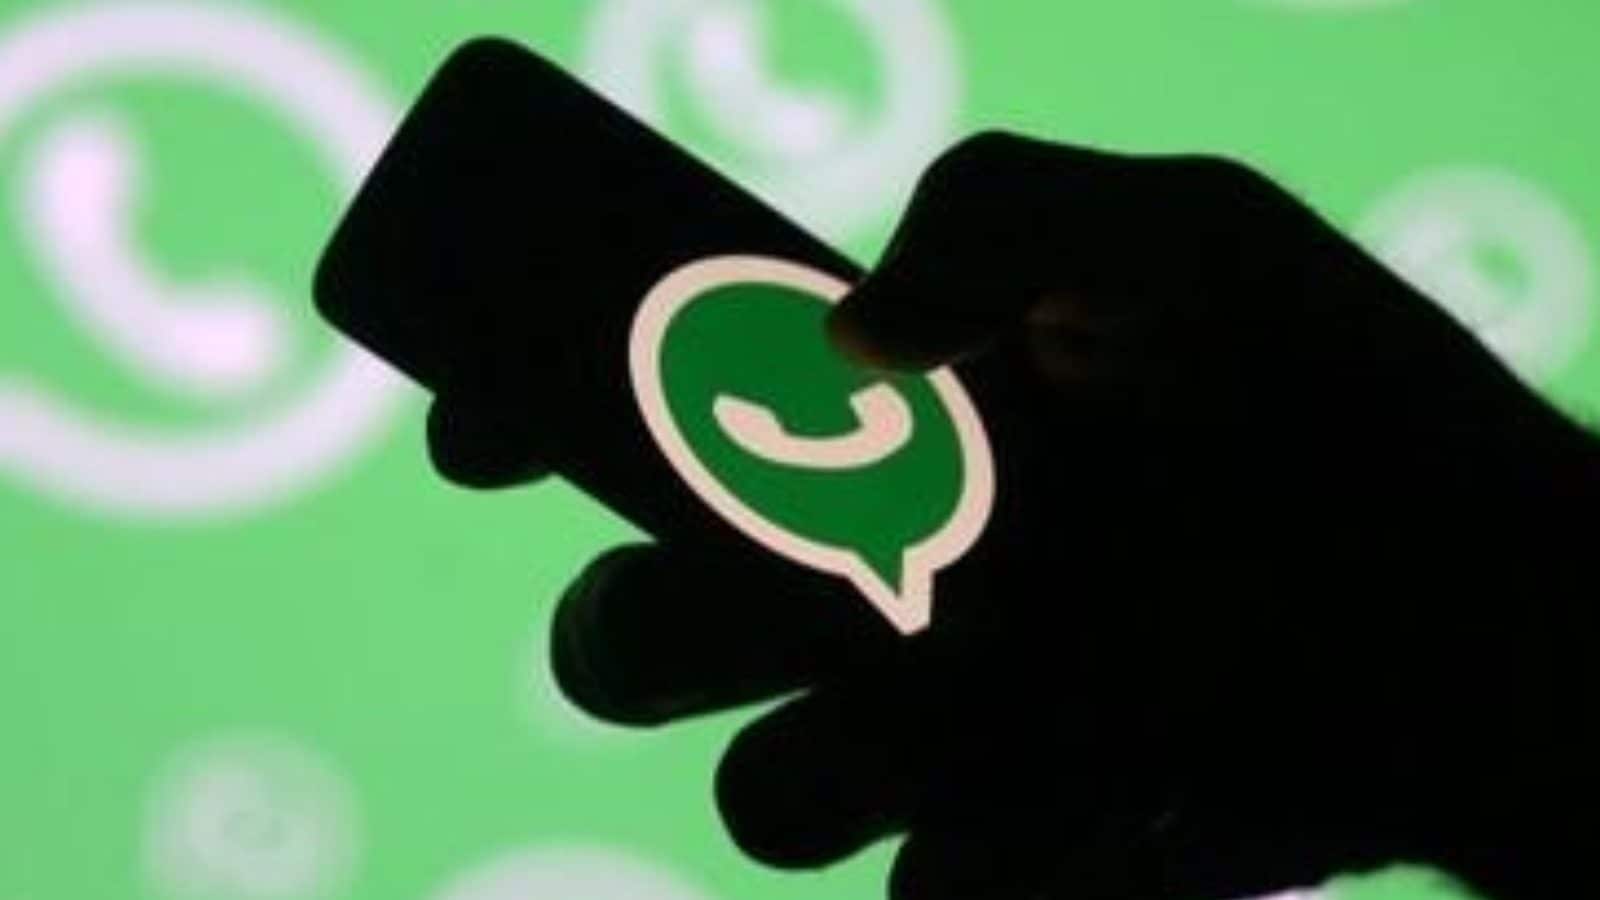 Read more about the article WhatsApp Working On New Feature To Send High-Quality Photos: Know More